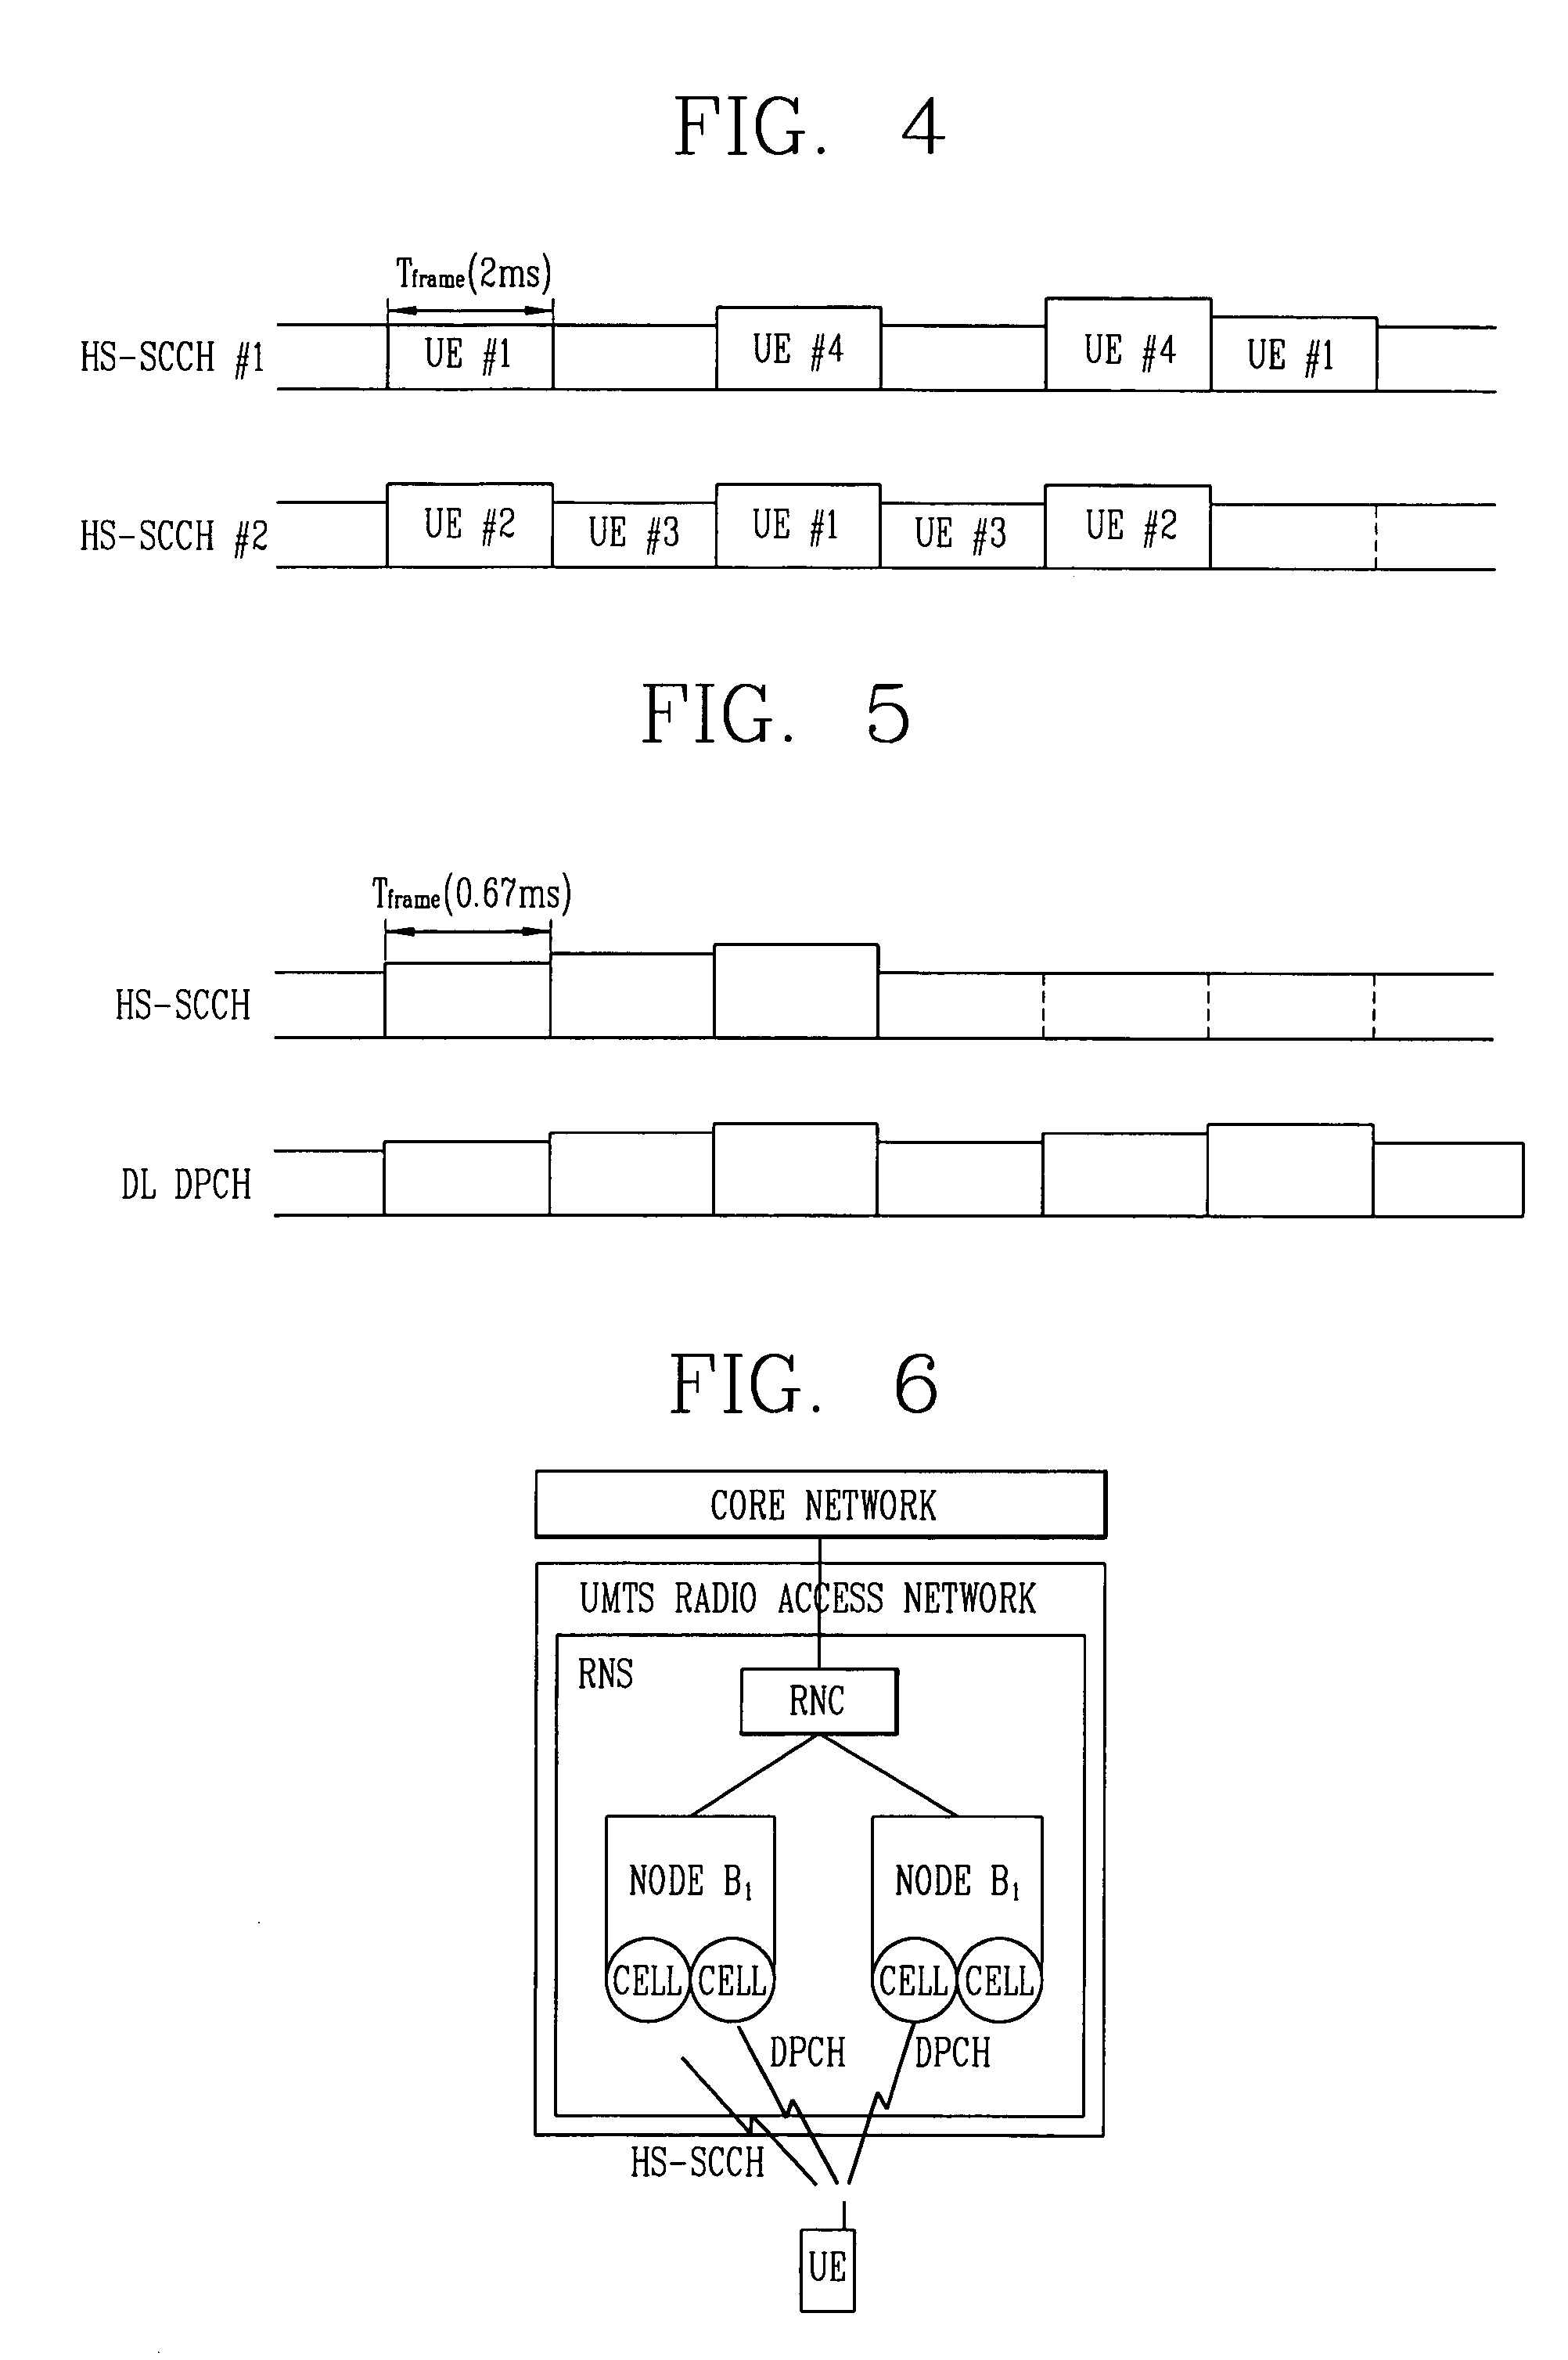 Method for controlling transmission power of HS-SCCH in UMTS system